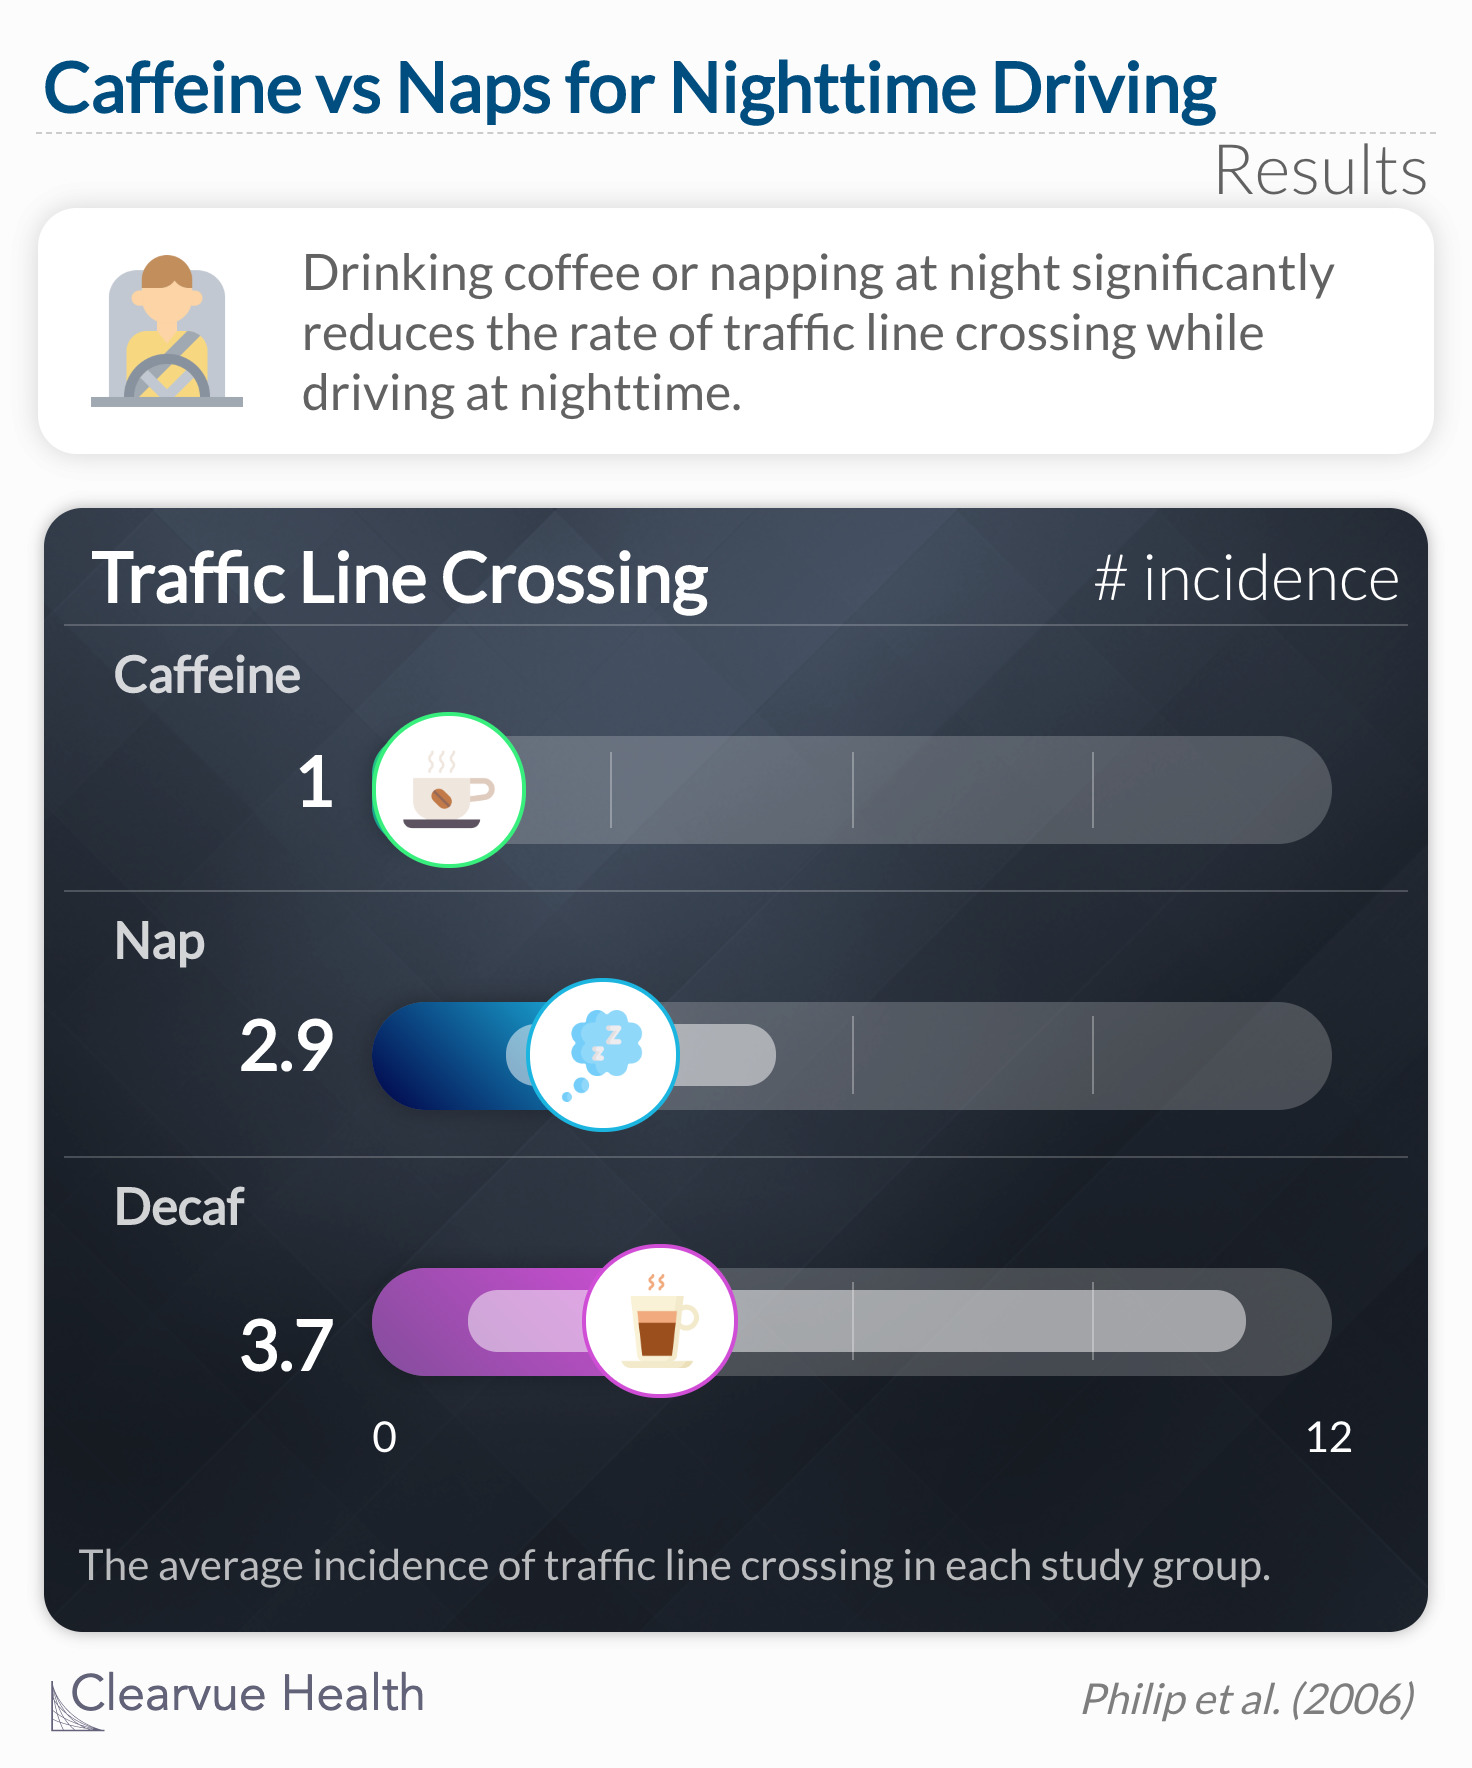 Drinking coffee or napping at night statistically significantly reduces driving impairment without altering subsequent sleep.